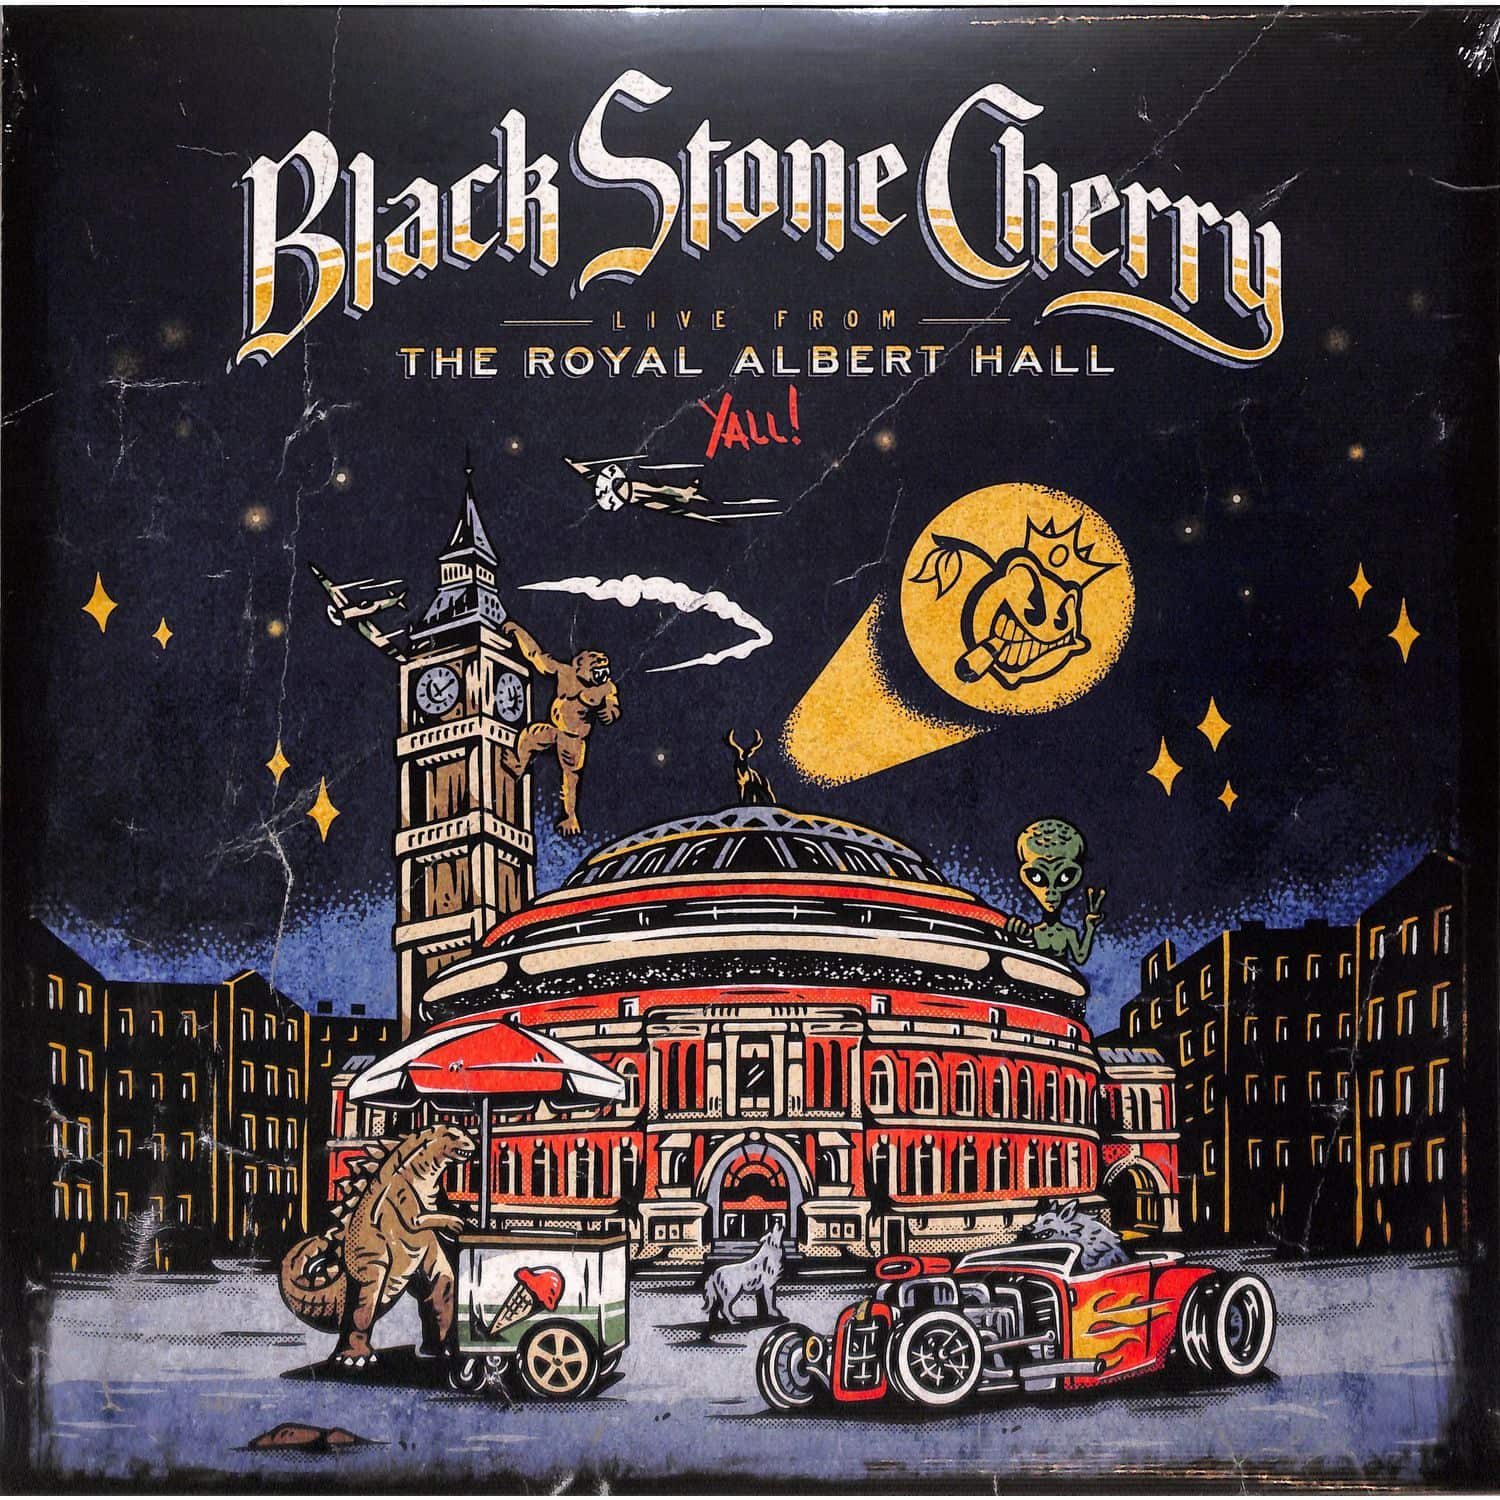 Black Stone Cherry - LIVE FROM THE ROYAL ALBERT HALL...Y ALL! 